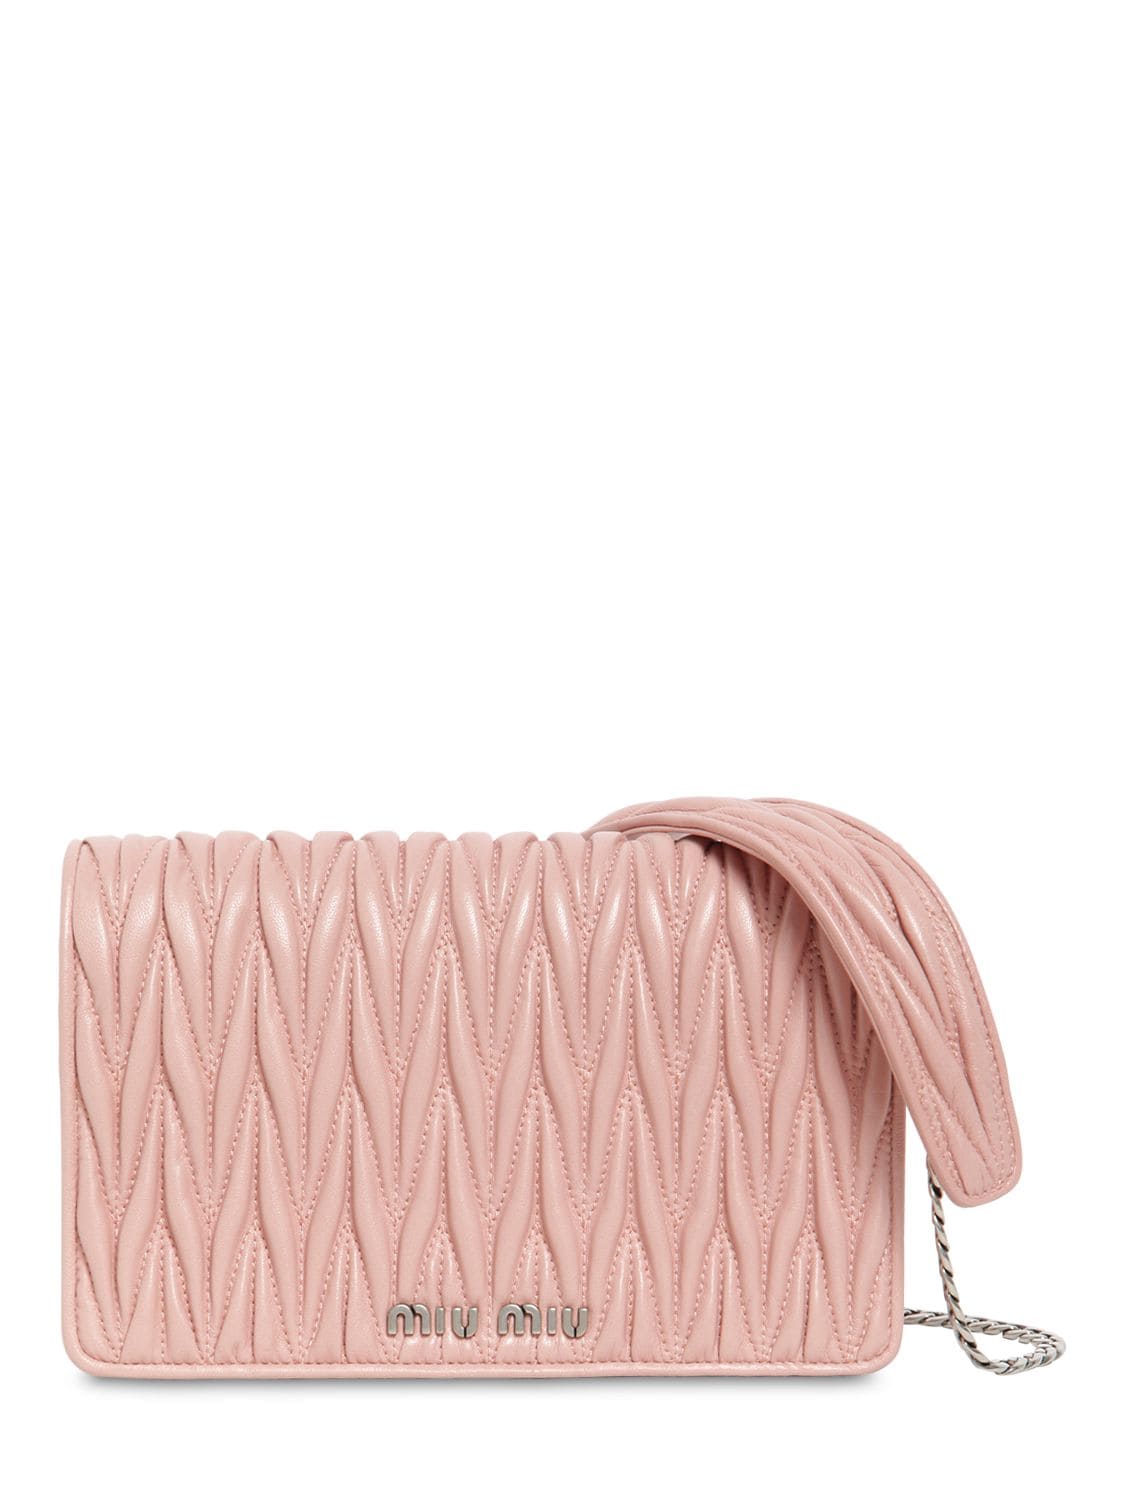 Miu Miu Mini Delice Quilted Leather Shoulder Bag In Pink